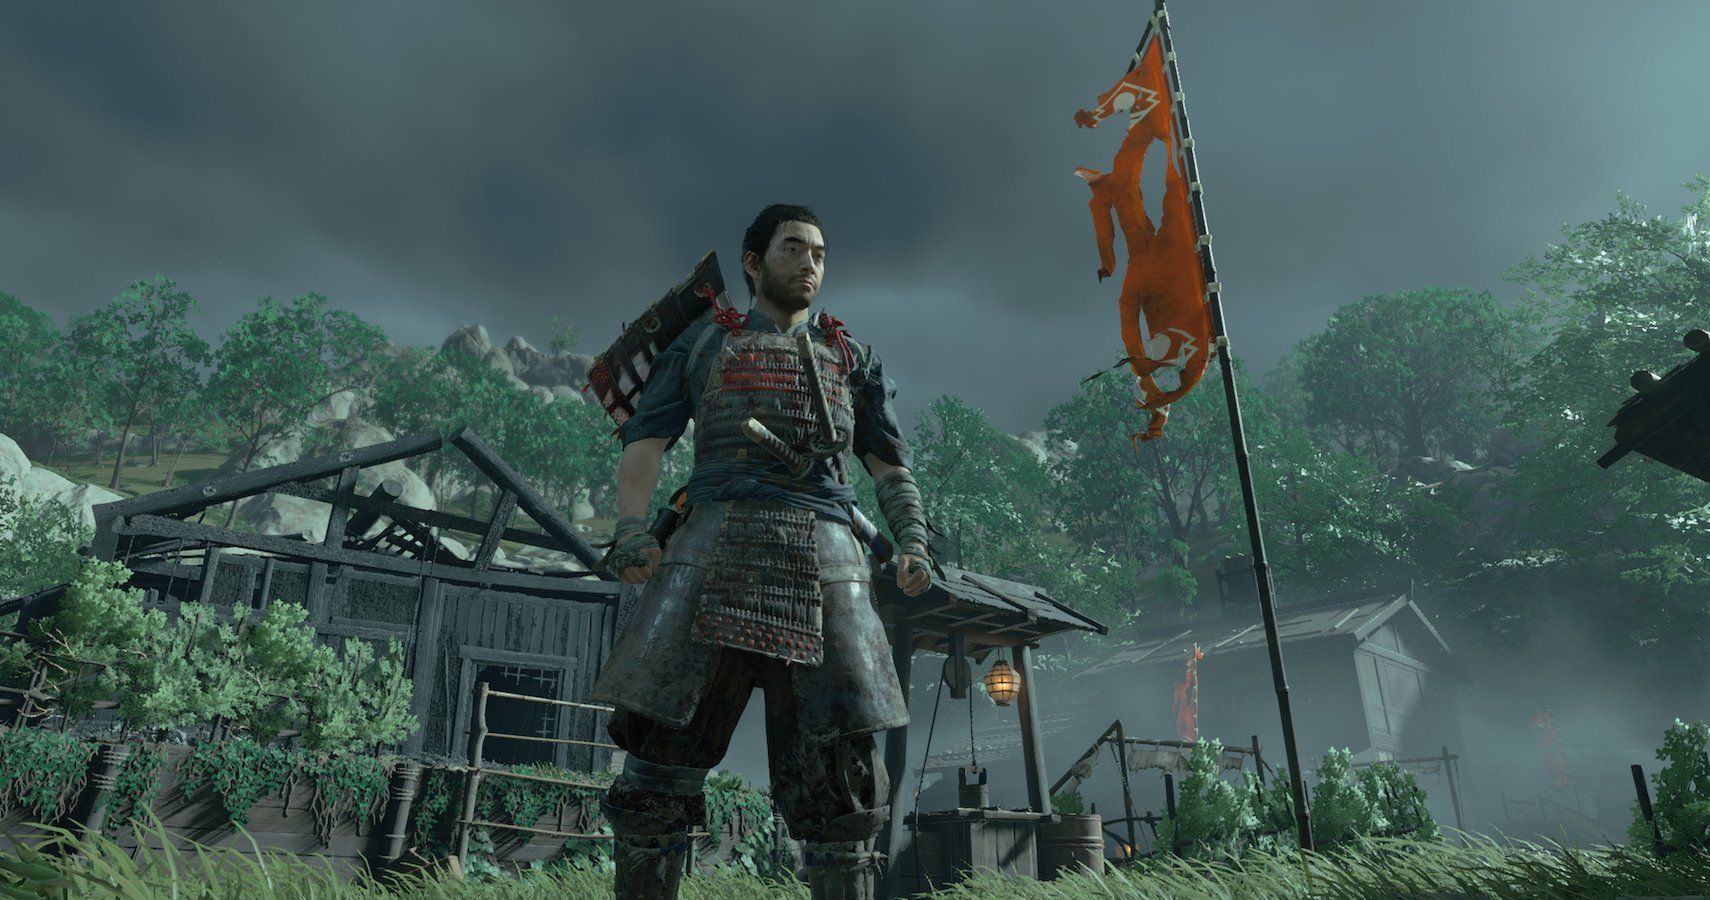 Can I play Ghost of Tsushima on Windows 7? - Quora